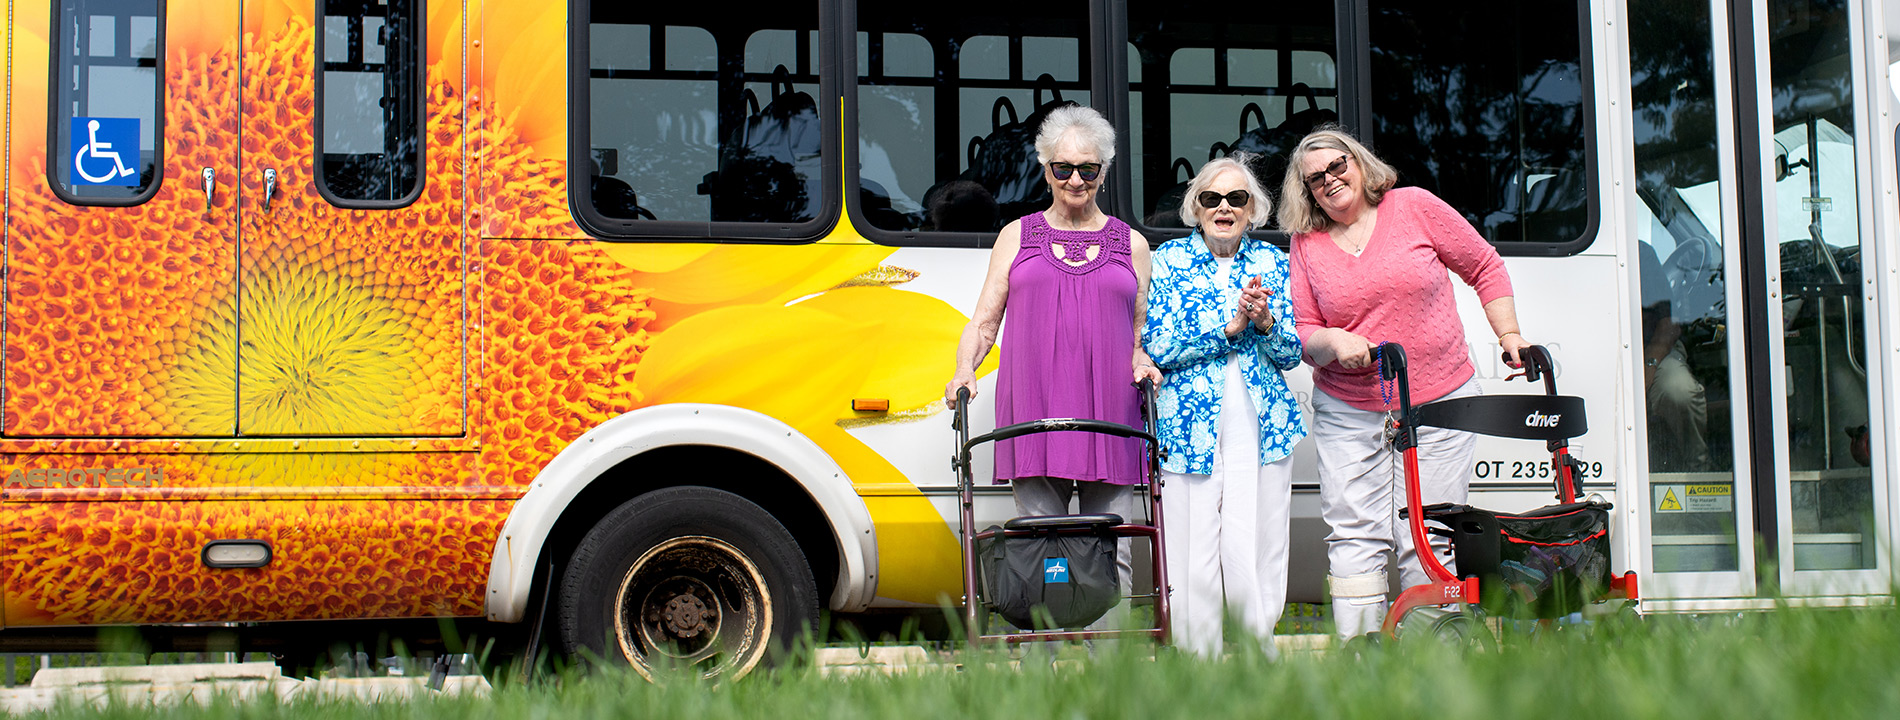 Three residents wearing sunglasses are standing in front of a bus.